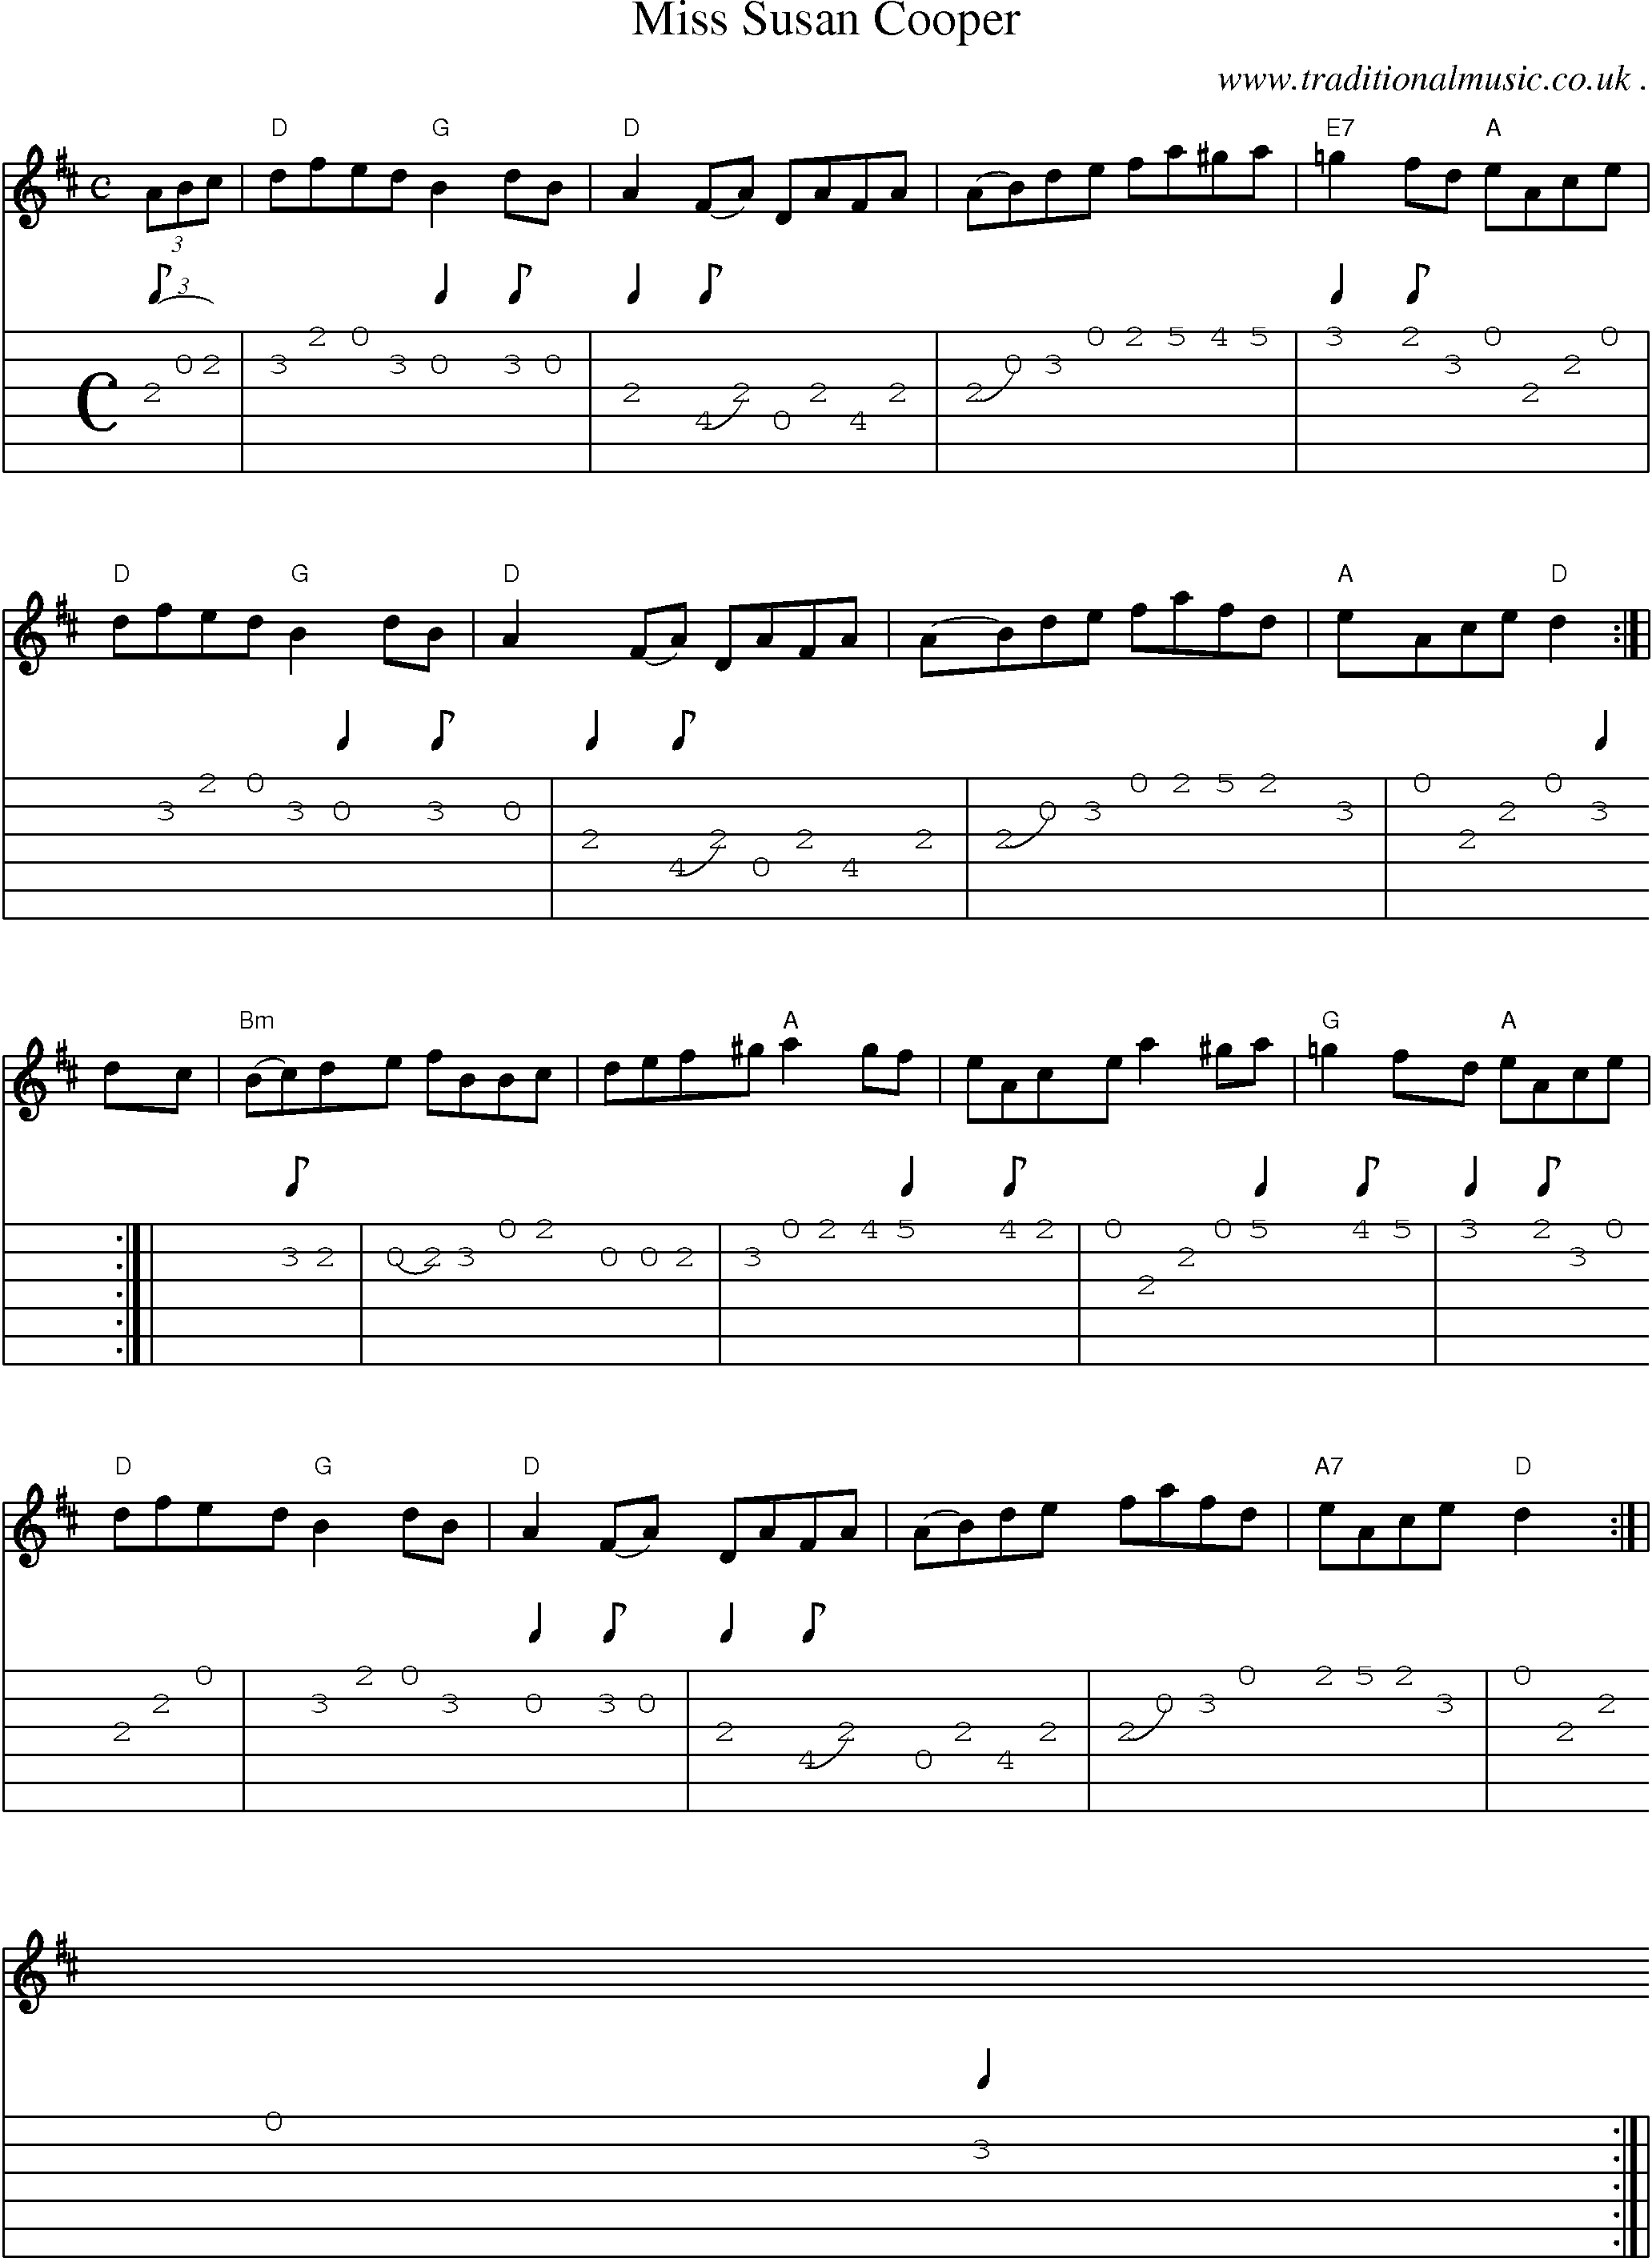 Sheet-music  score, Chords and Guitar Tabs for Miss Susan Cooper